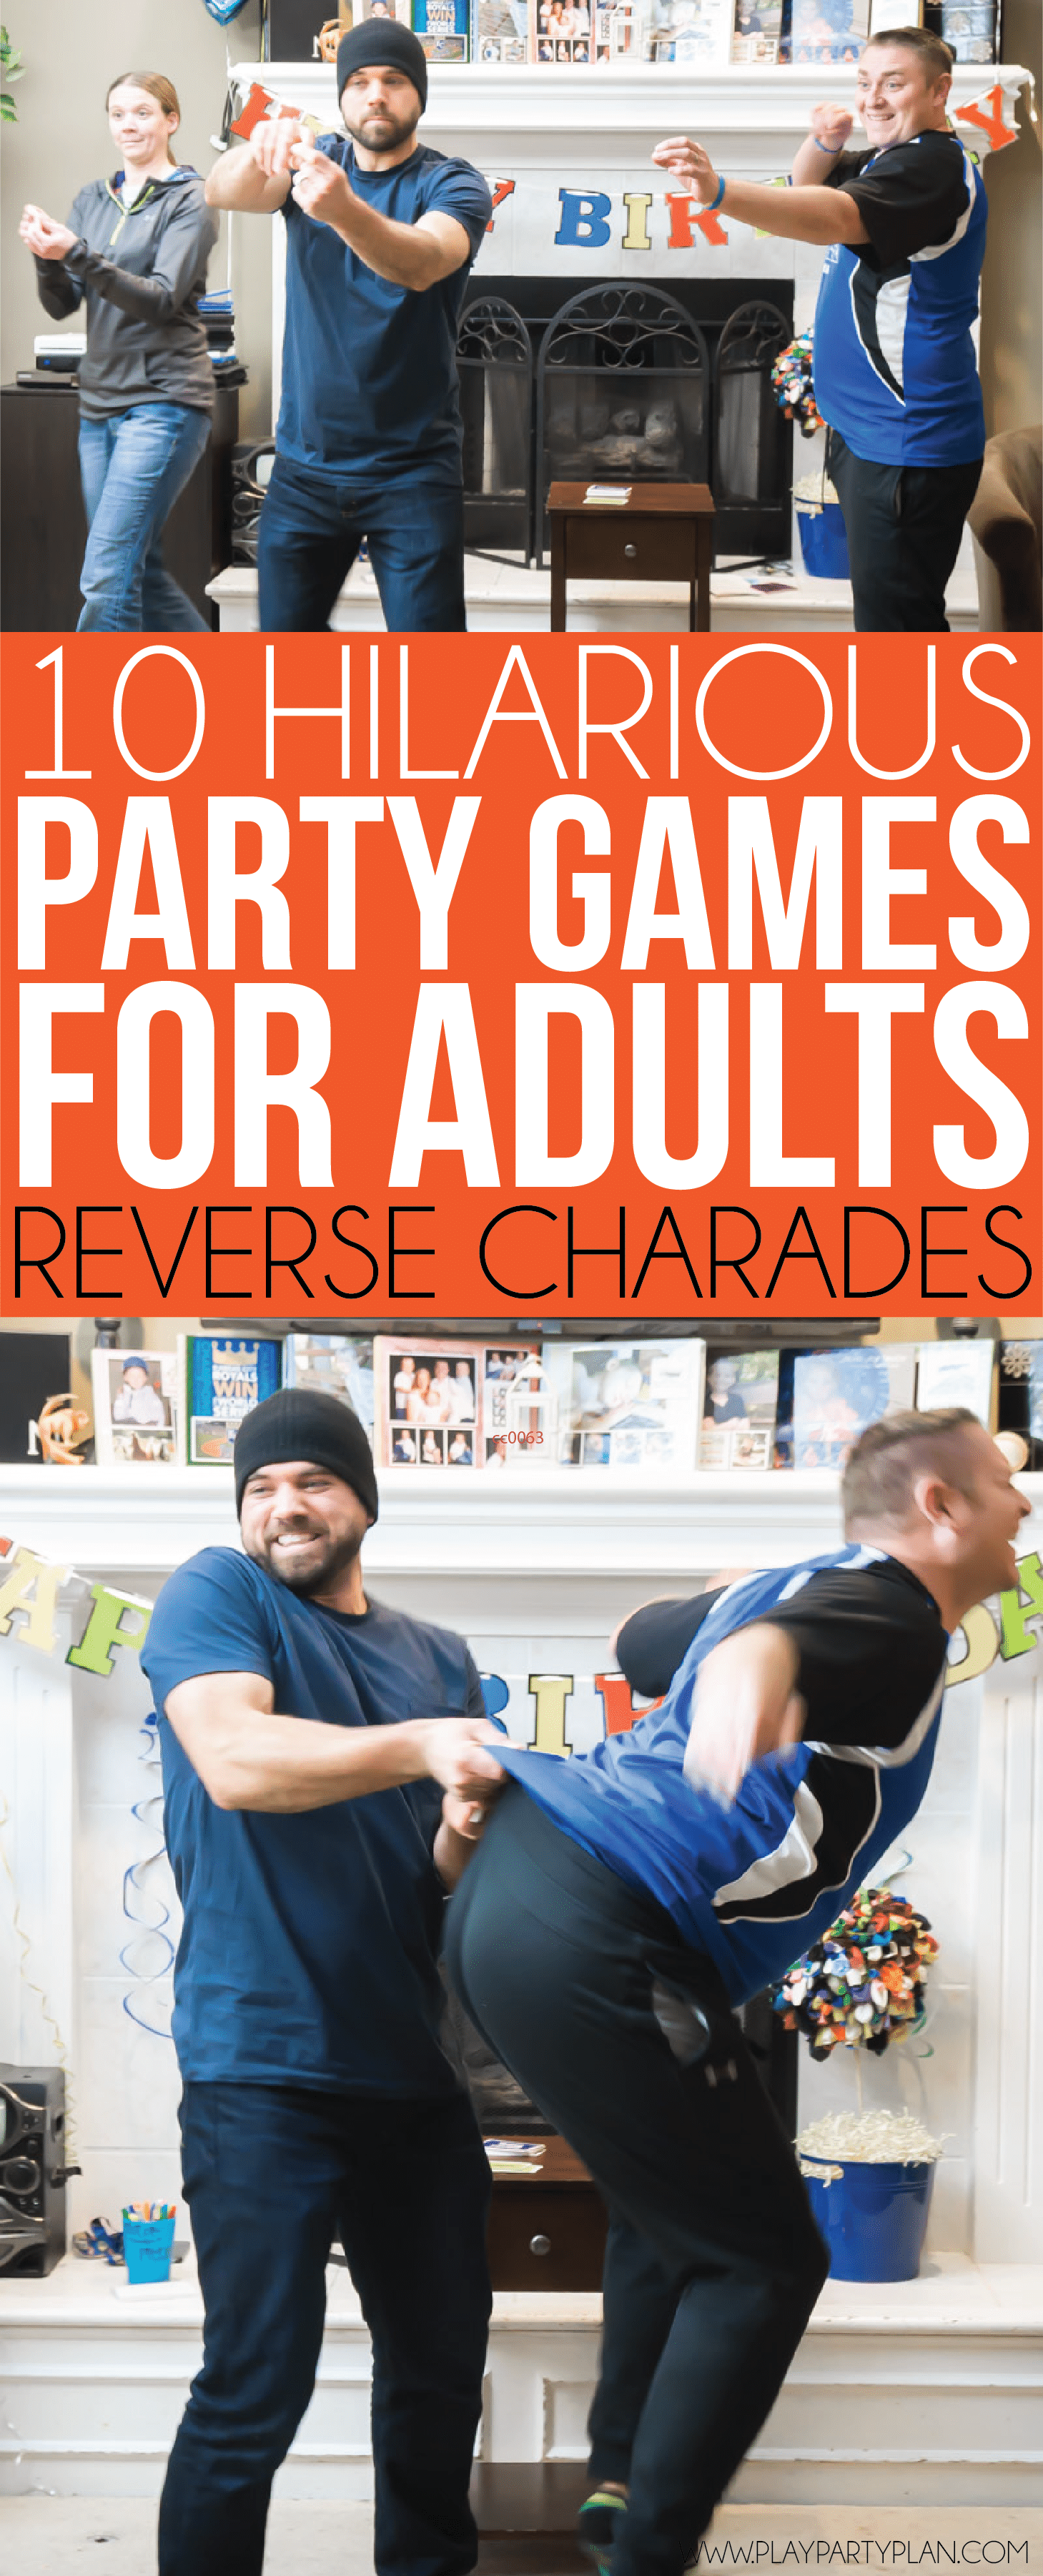 Renegade reccomend Adult only party games